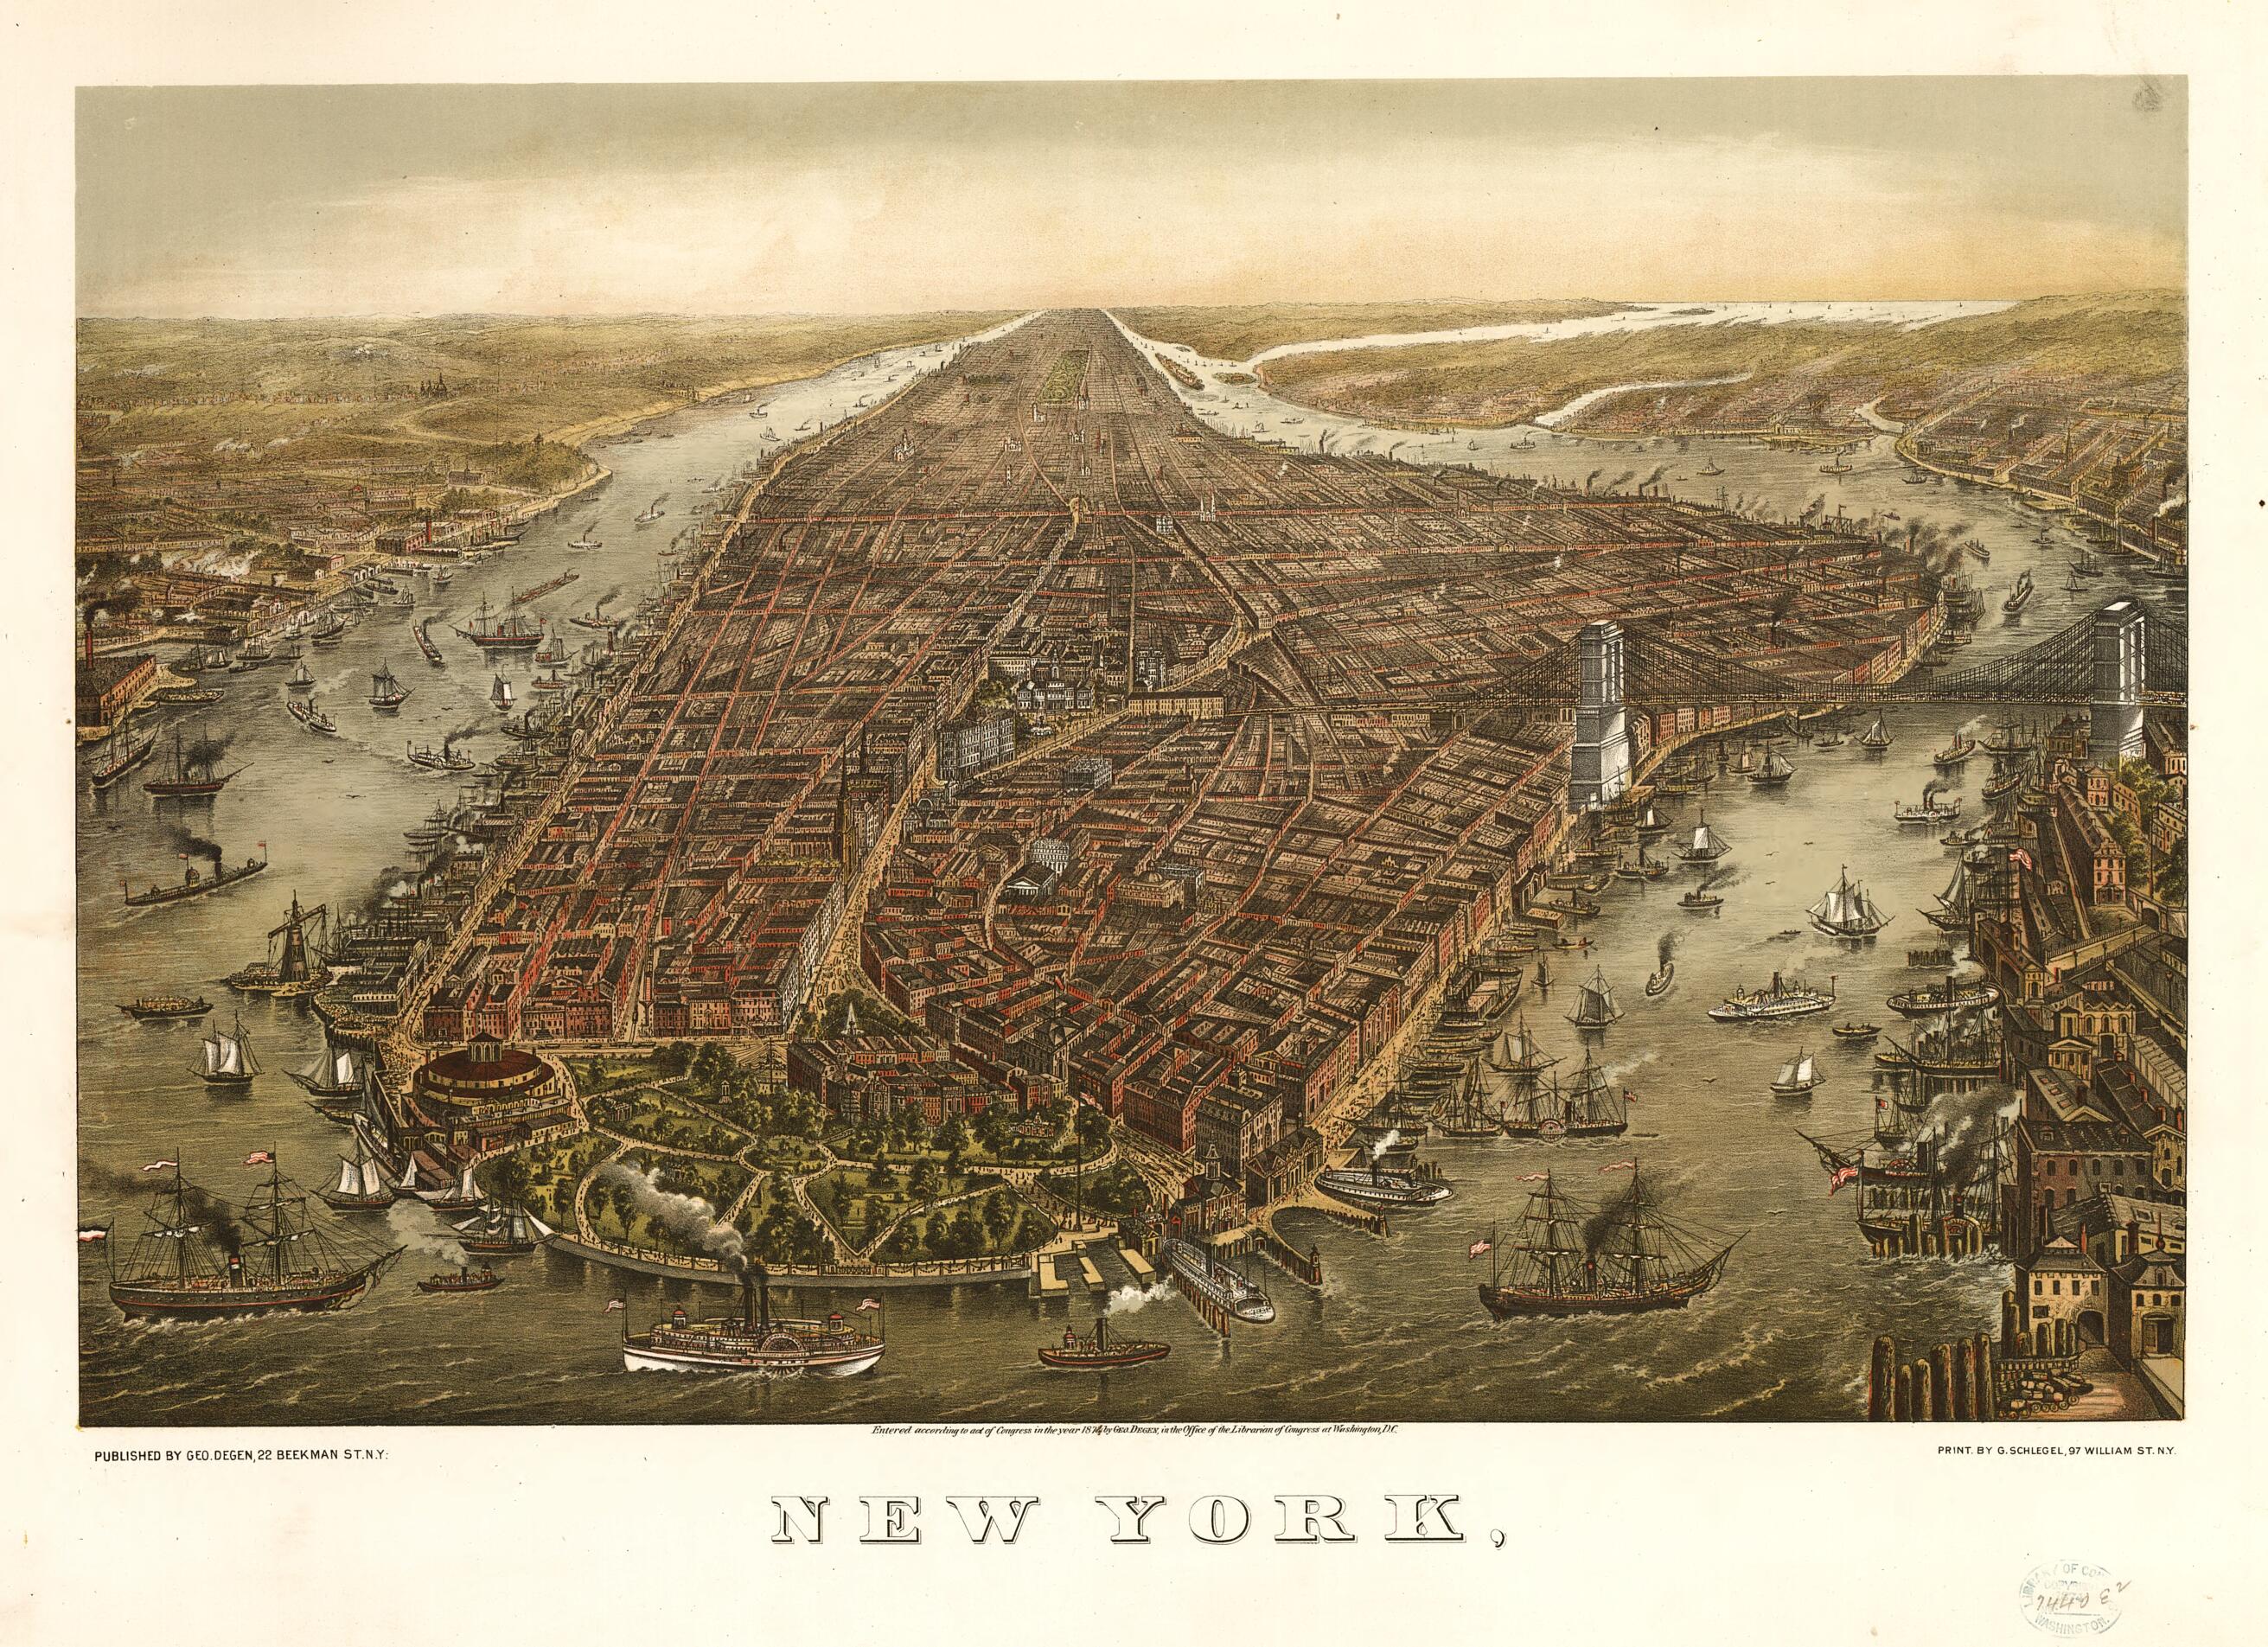 This old map of New York, / Print by G. Schlegel, 97 William St. New York from 1873 was created by George Schlegel in 1873